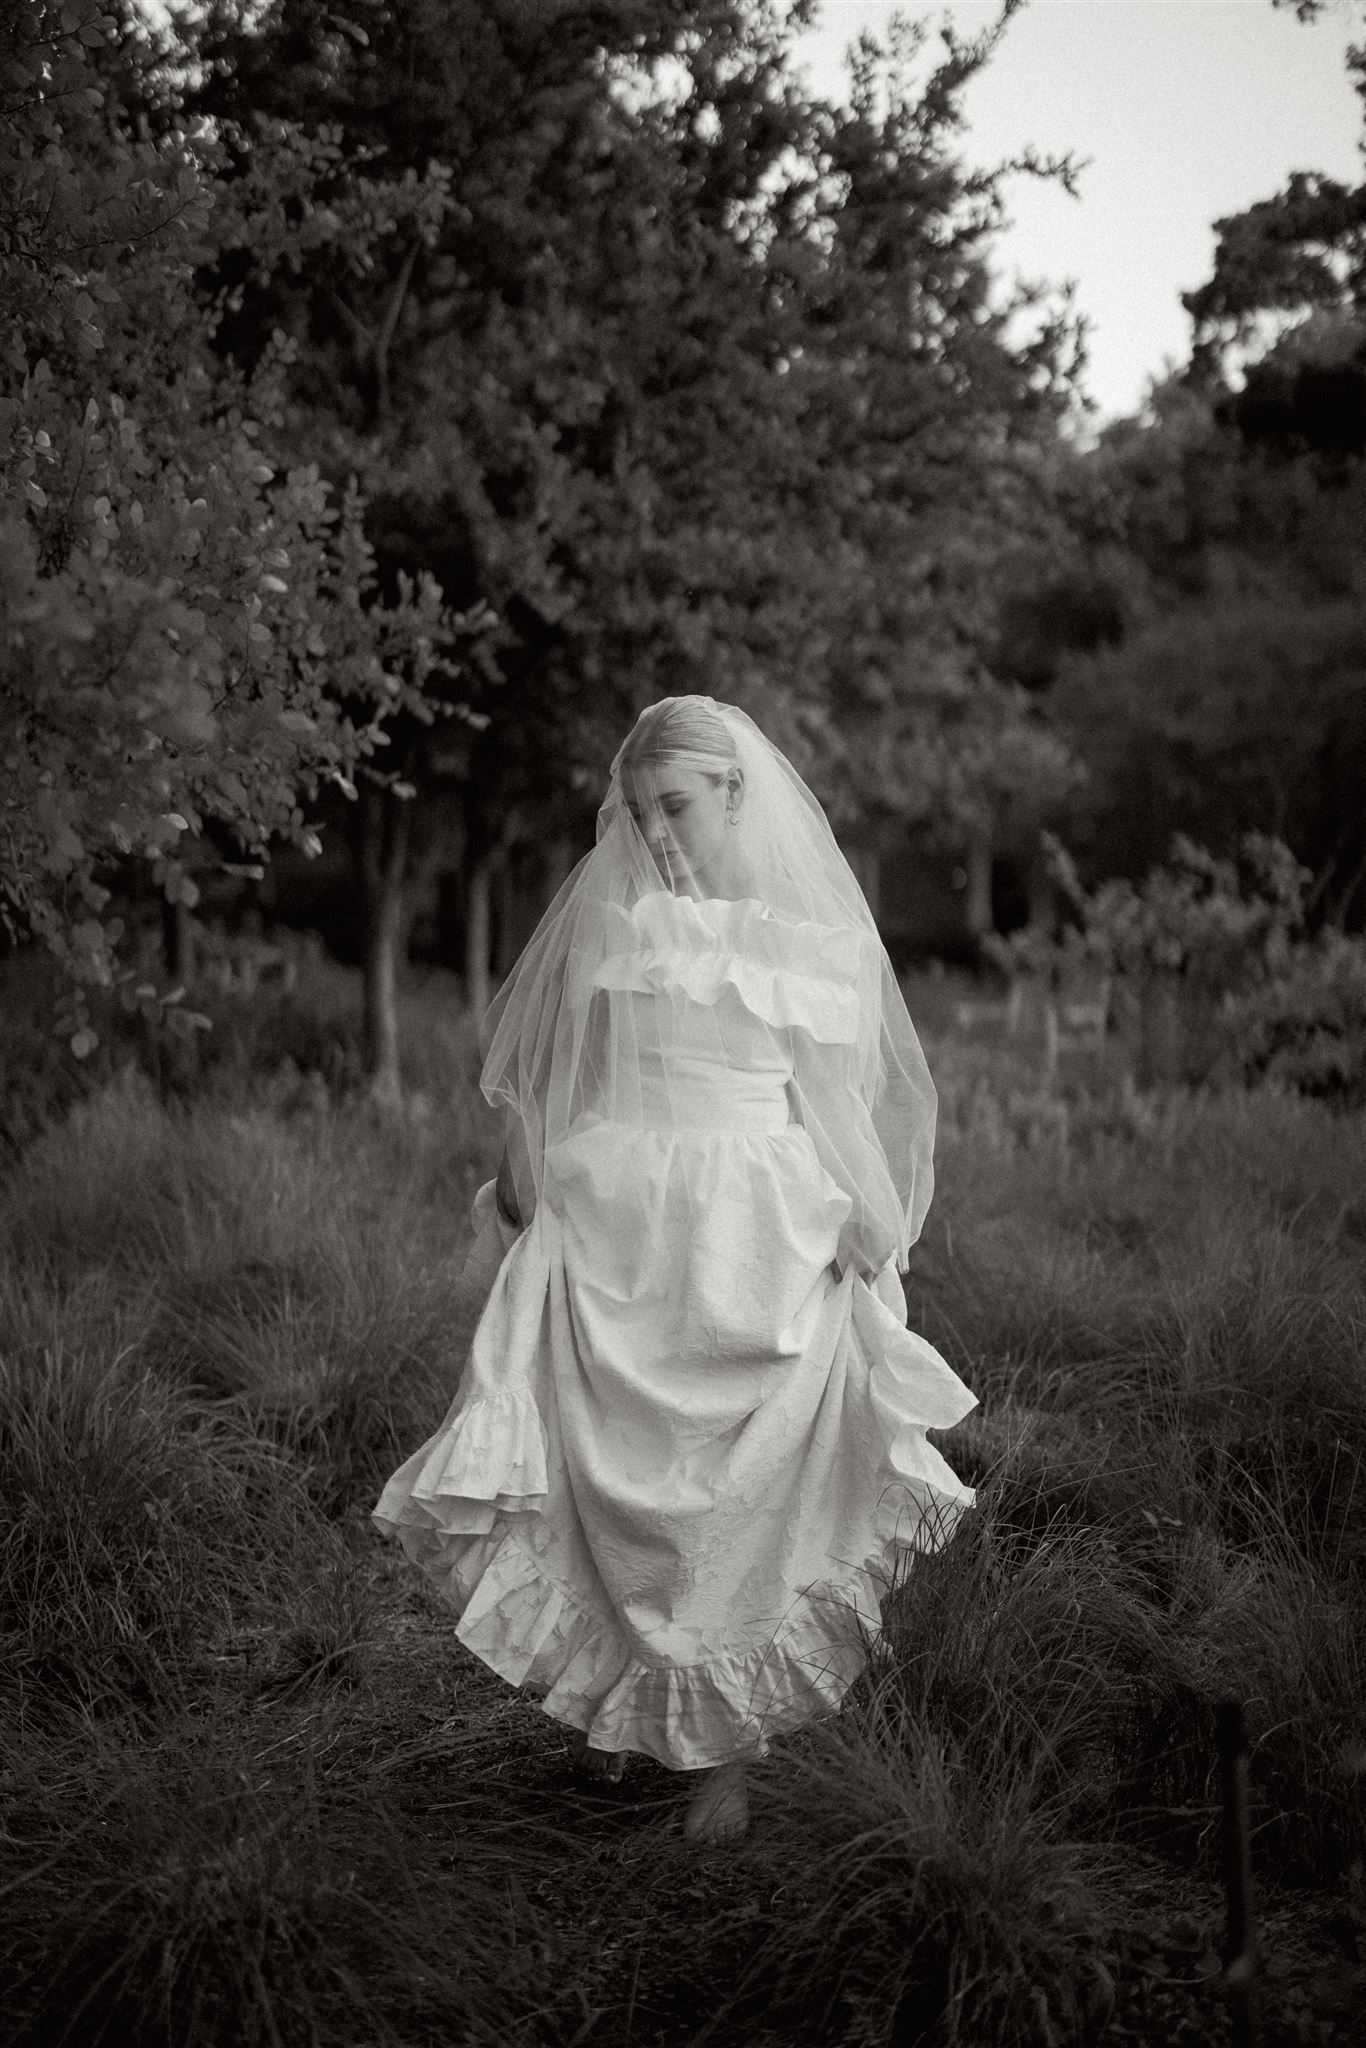 Bride in white wedding dress and veil walking in grass